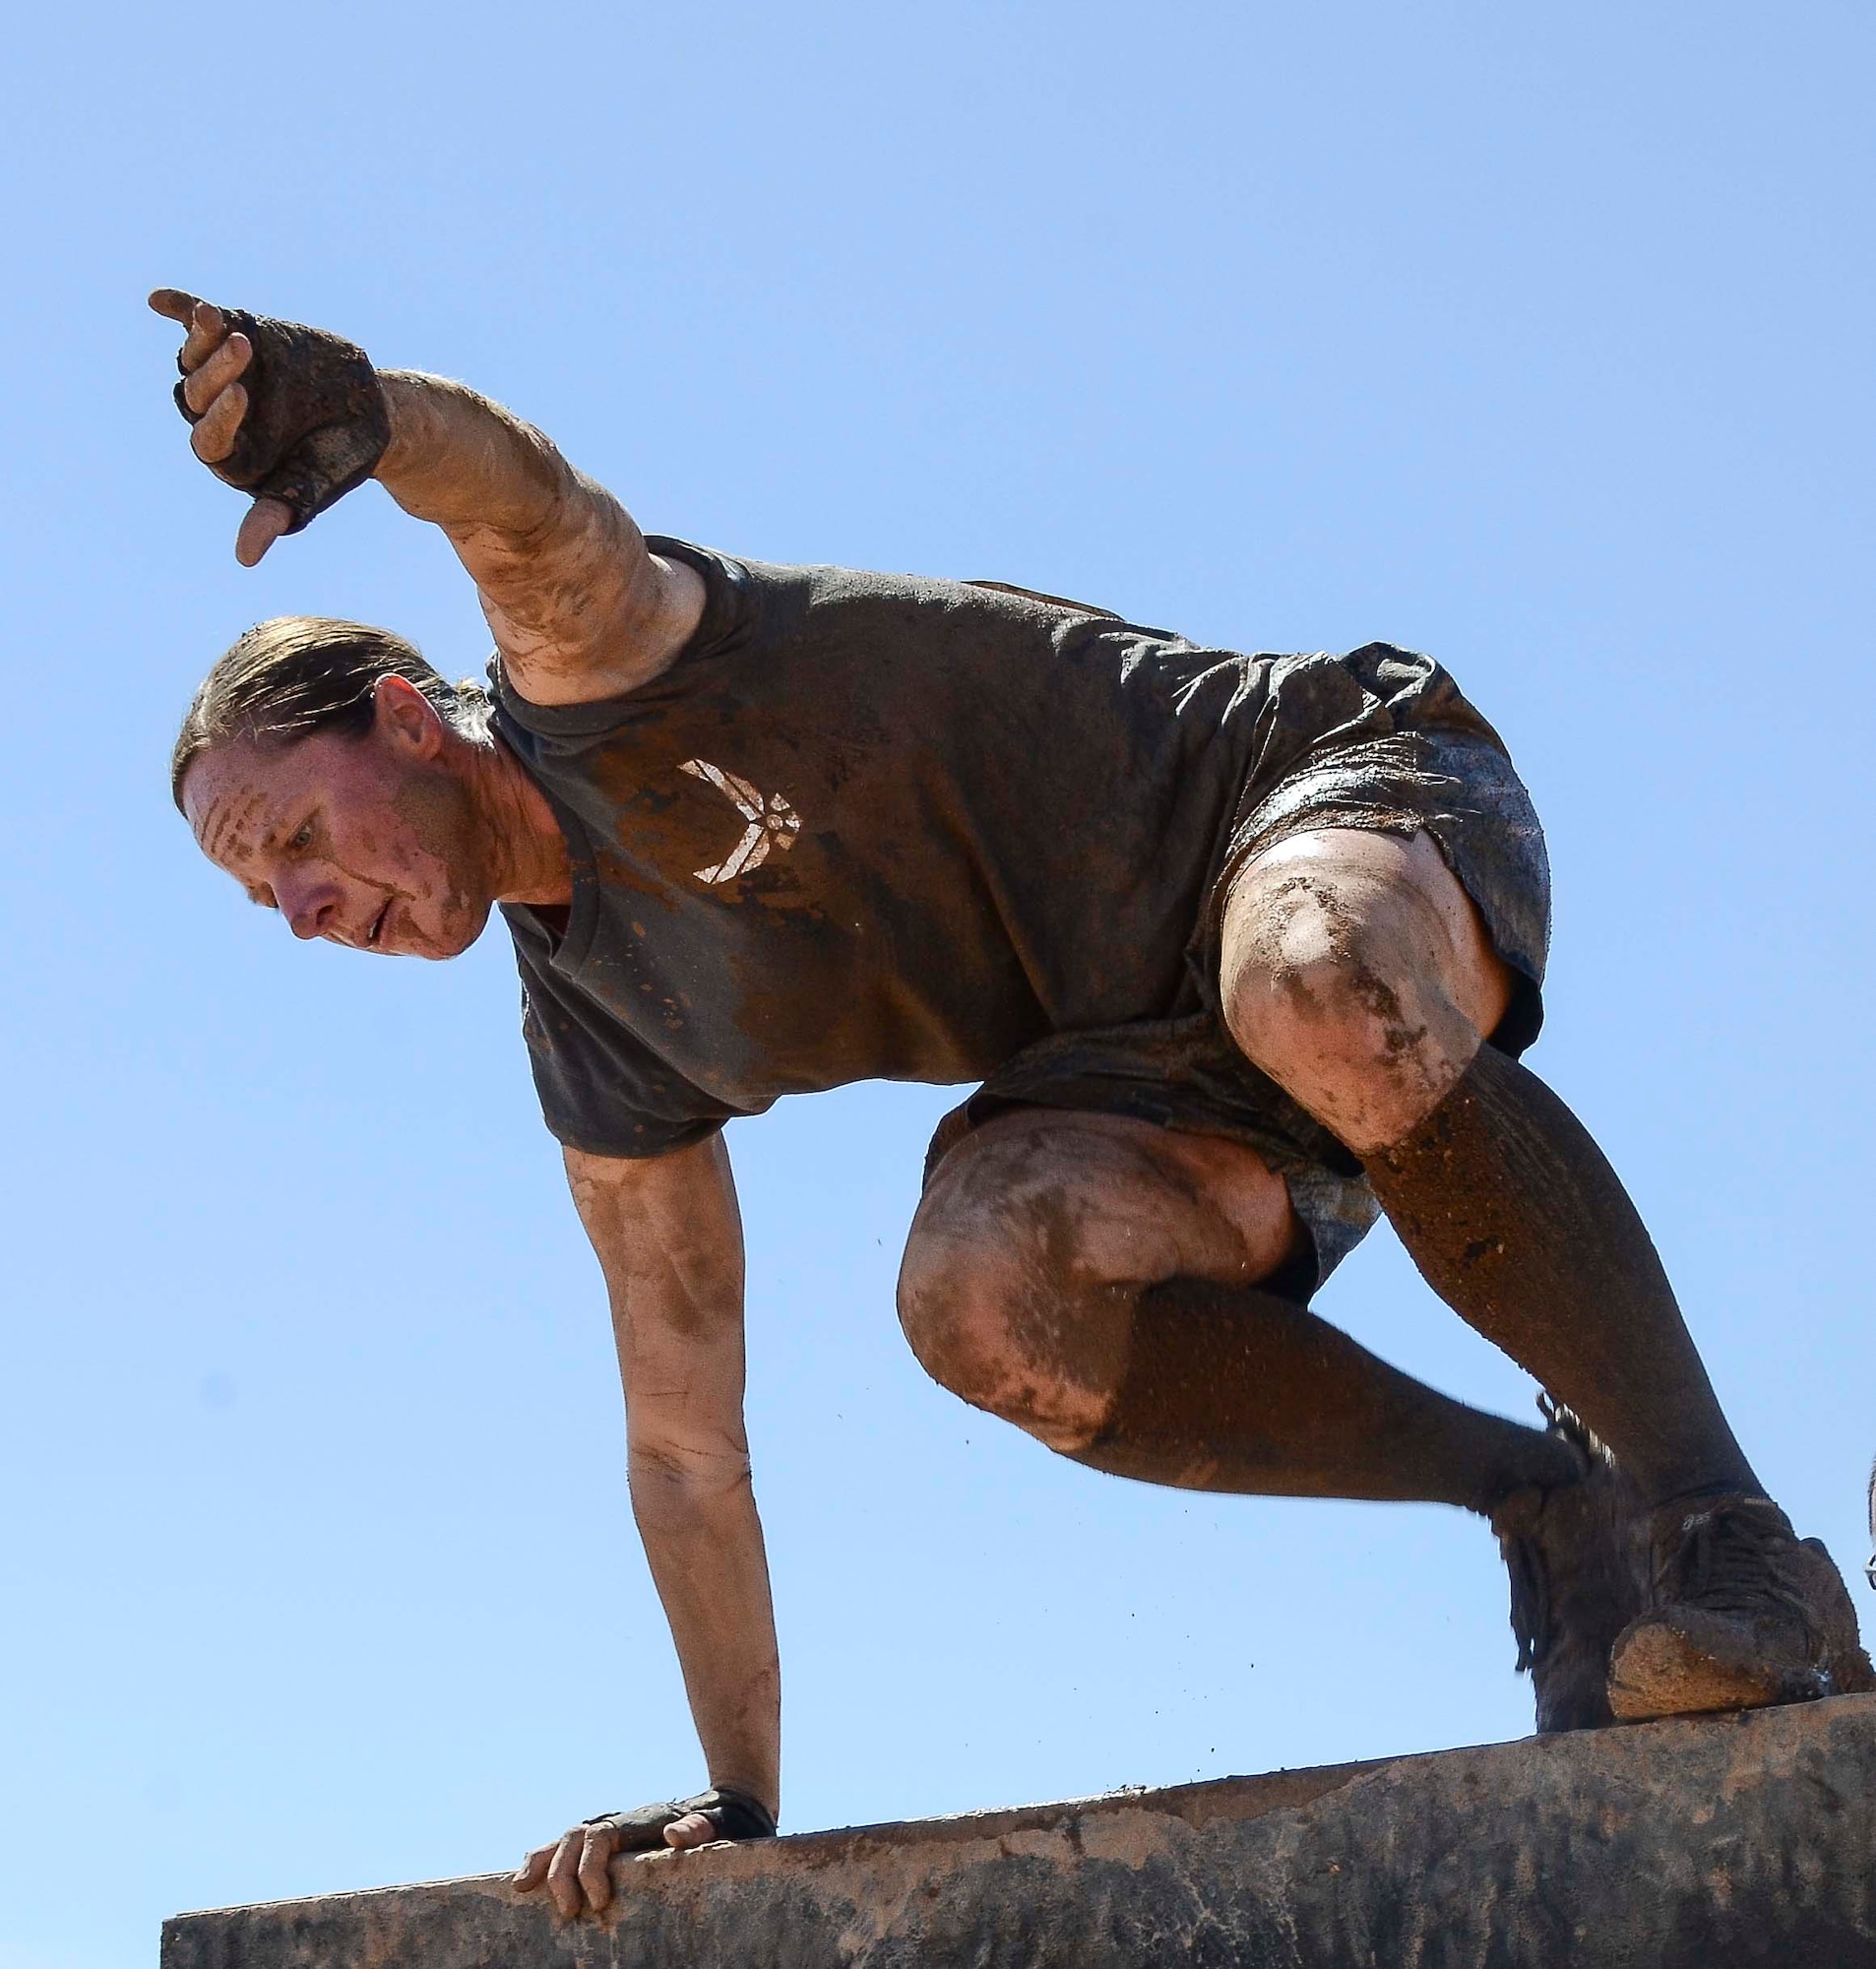 Capt. Yvonne Nollmann, 12th Air Force (Air Forces Southern) Section Commander, hurdles over a wall during the Hard Charge Televised Obstacle Mission at the Pima County Fairgrounds in Tucson, Ariz., on March 29. Climbing, crawling and sprinting were a few of the many ways the members form 12th AF maneuvered though the rigorous four-mile 37-obstacle course. (U.S. Air Force photo by Staff Sgt. Adam Grant/Released)